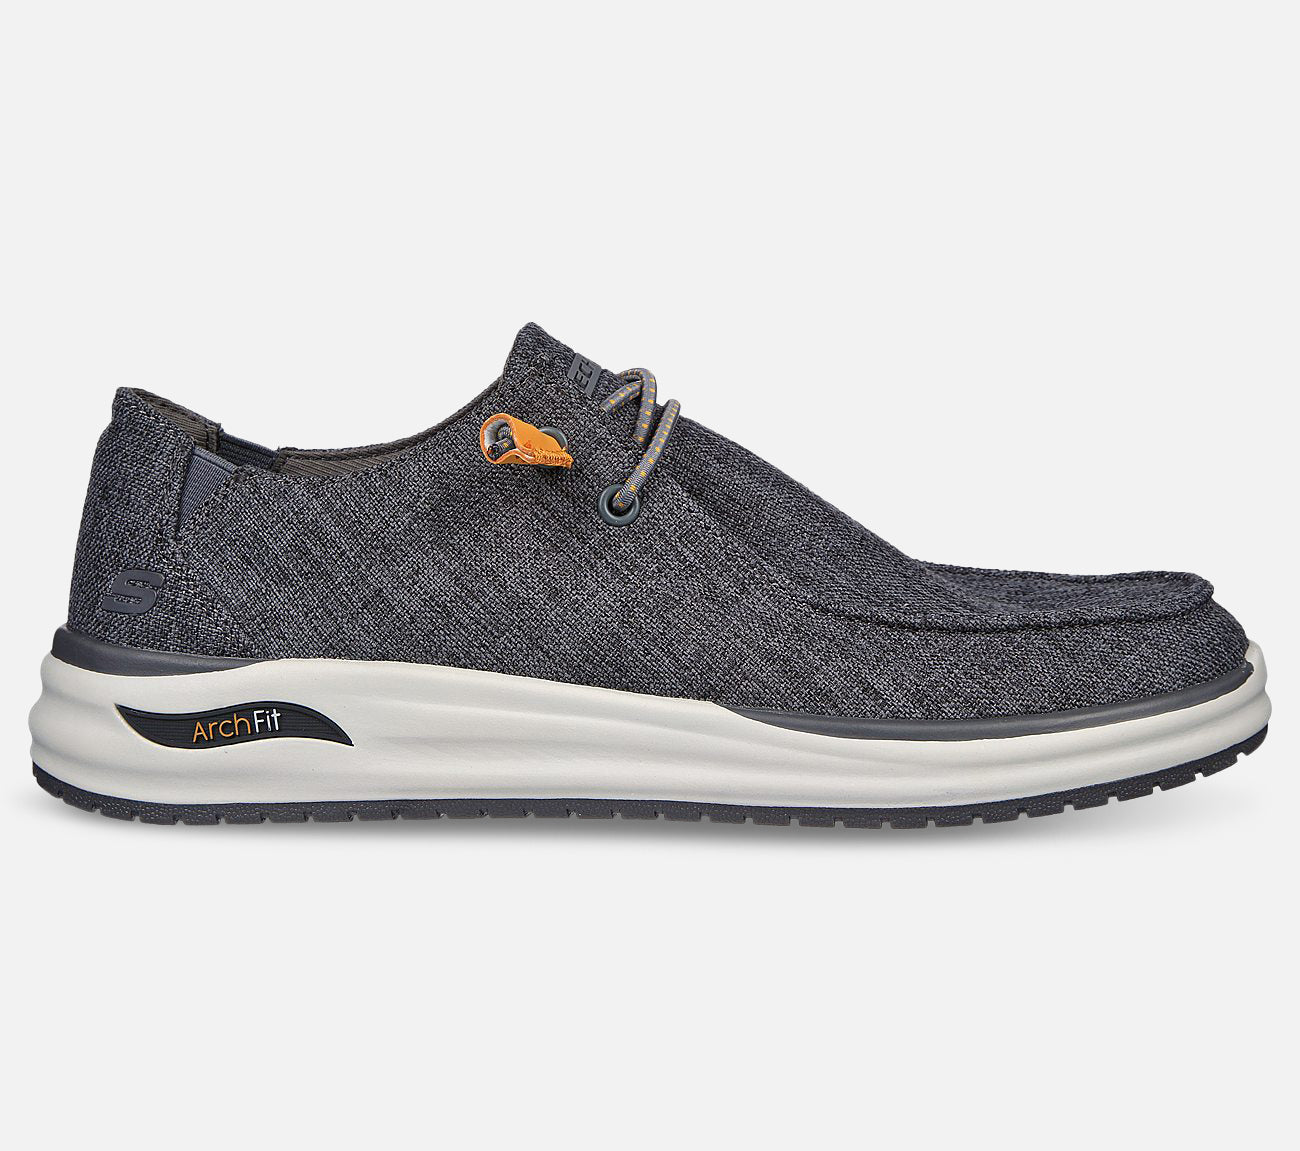 Arch Fit Melo - Tandro Shoe Skechers